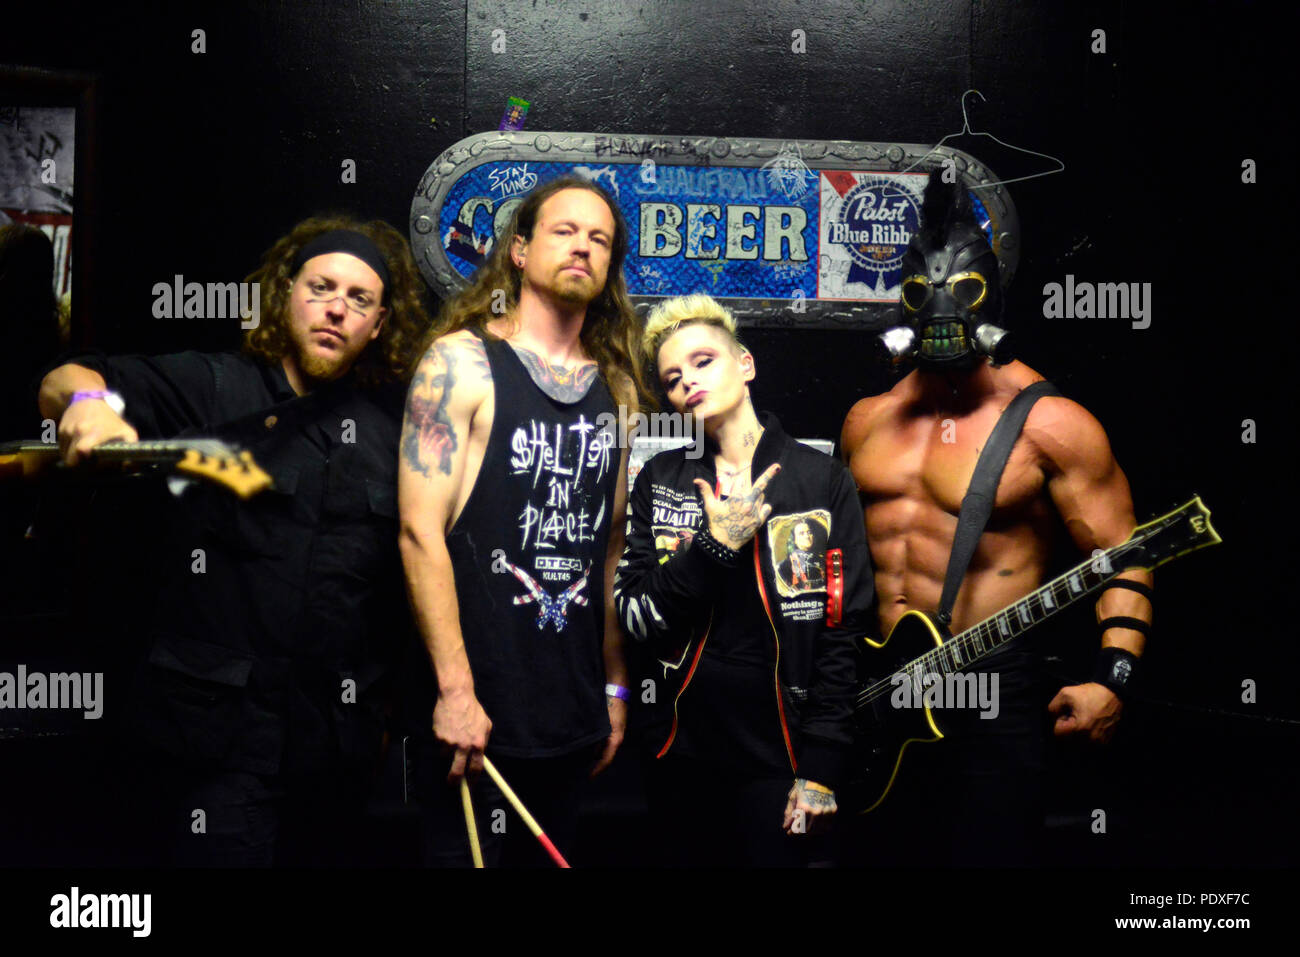 West Hollywood, CA, USA. 8th Aug, 2018. Musicians - [left to right] DREWSKI BARNES bass player, JUSTIN KIER drums, OTEP SHAMAYA lead vocals, and ''ARISTOTLE'' ARI MIHALOPOULOS guitarist for OTEP, back stage at The Whisky A Go Go, West Hollywood, California, USA, August 8, 2018. OTEP is a Los Angeles based heavy metal band that integrates rap metal, new metal, alternative metal into their sound. OTEP is an anagram for poet. Otep Shamaya descibes the bands sound as, ''art house nu-metal.'' .Image Credit cr Scott Mitchell/ZUMA Press Credit: Scott Mitchell/ZUMA Wire/Alamy Live News Stock Photo